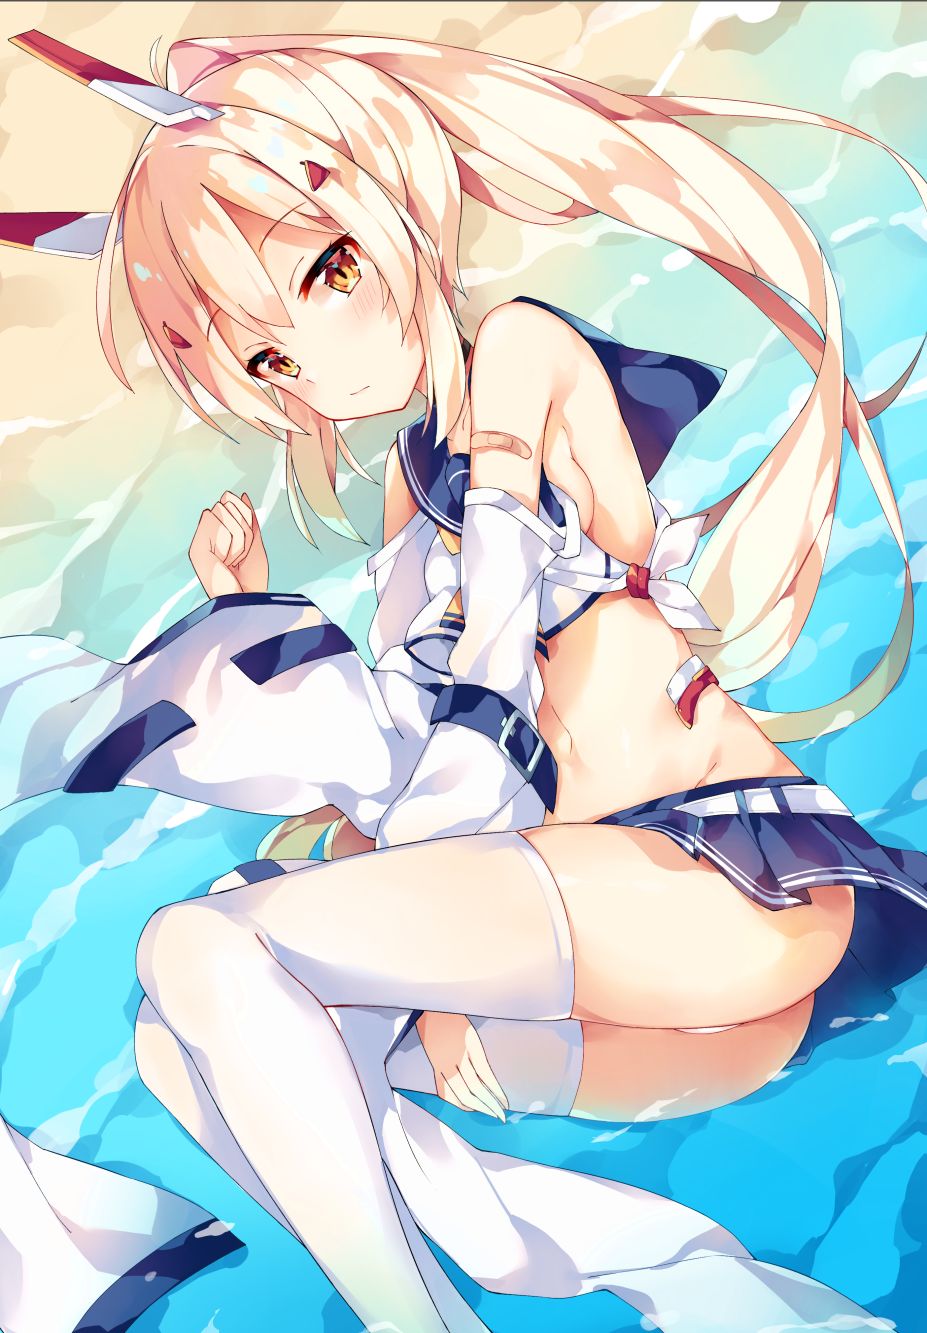 [Secondary] Moe images of swimsuit girls bathing in the sea and swimming pool 11